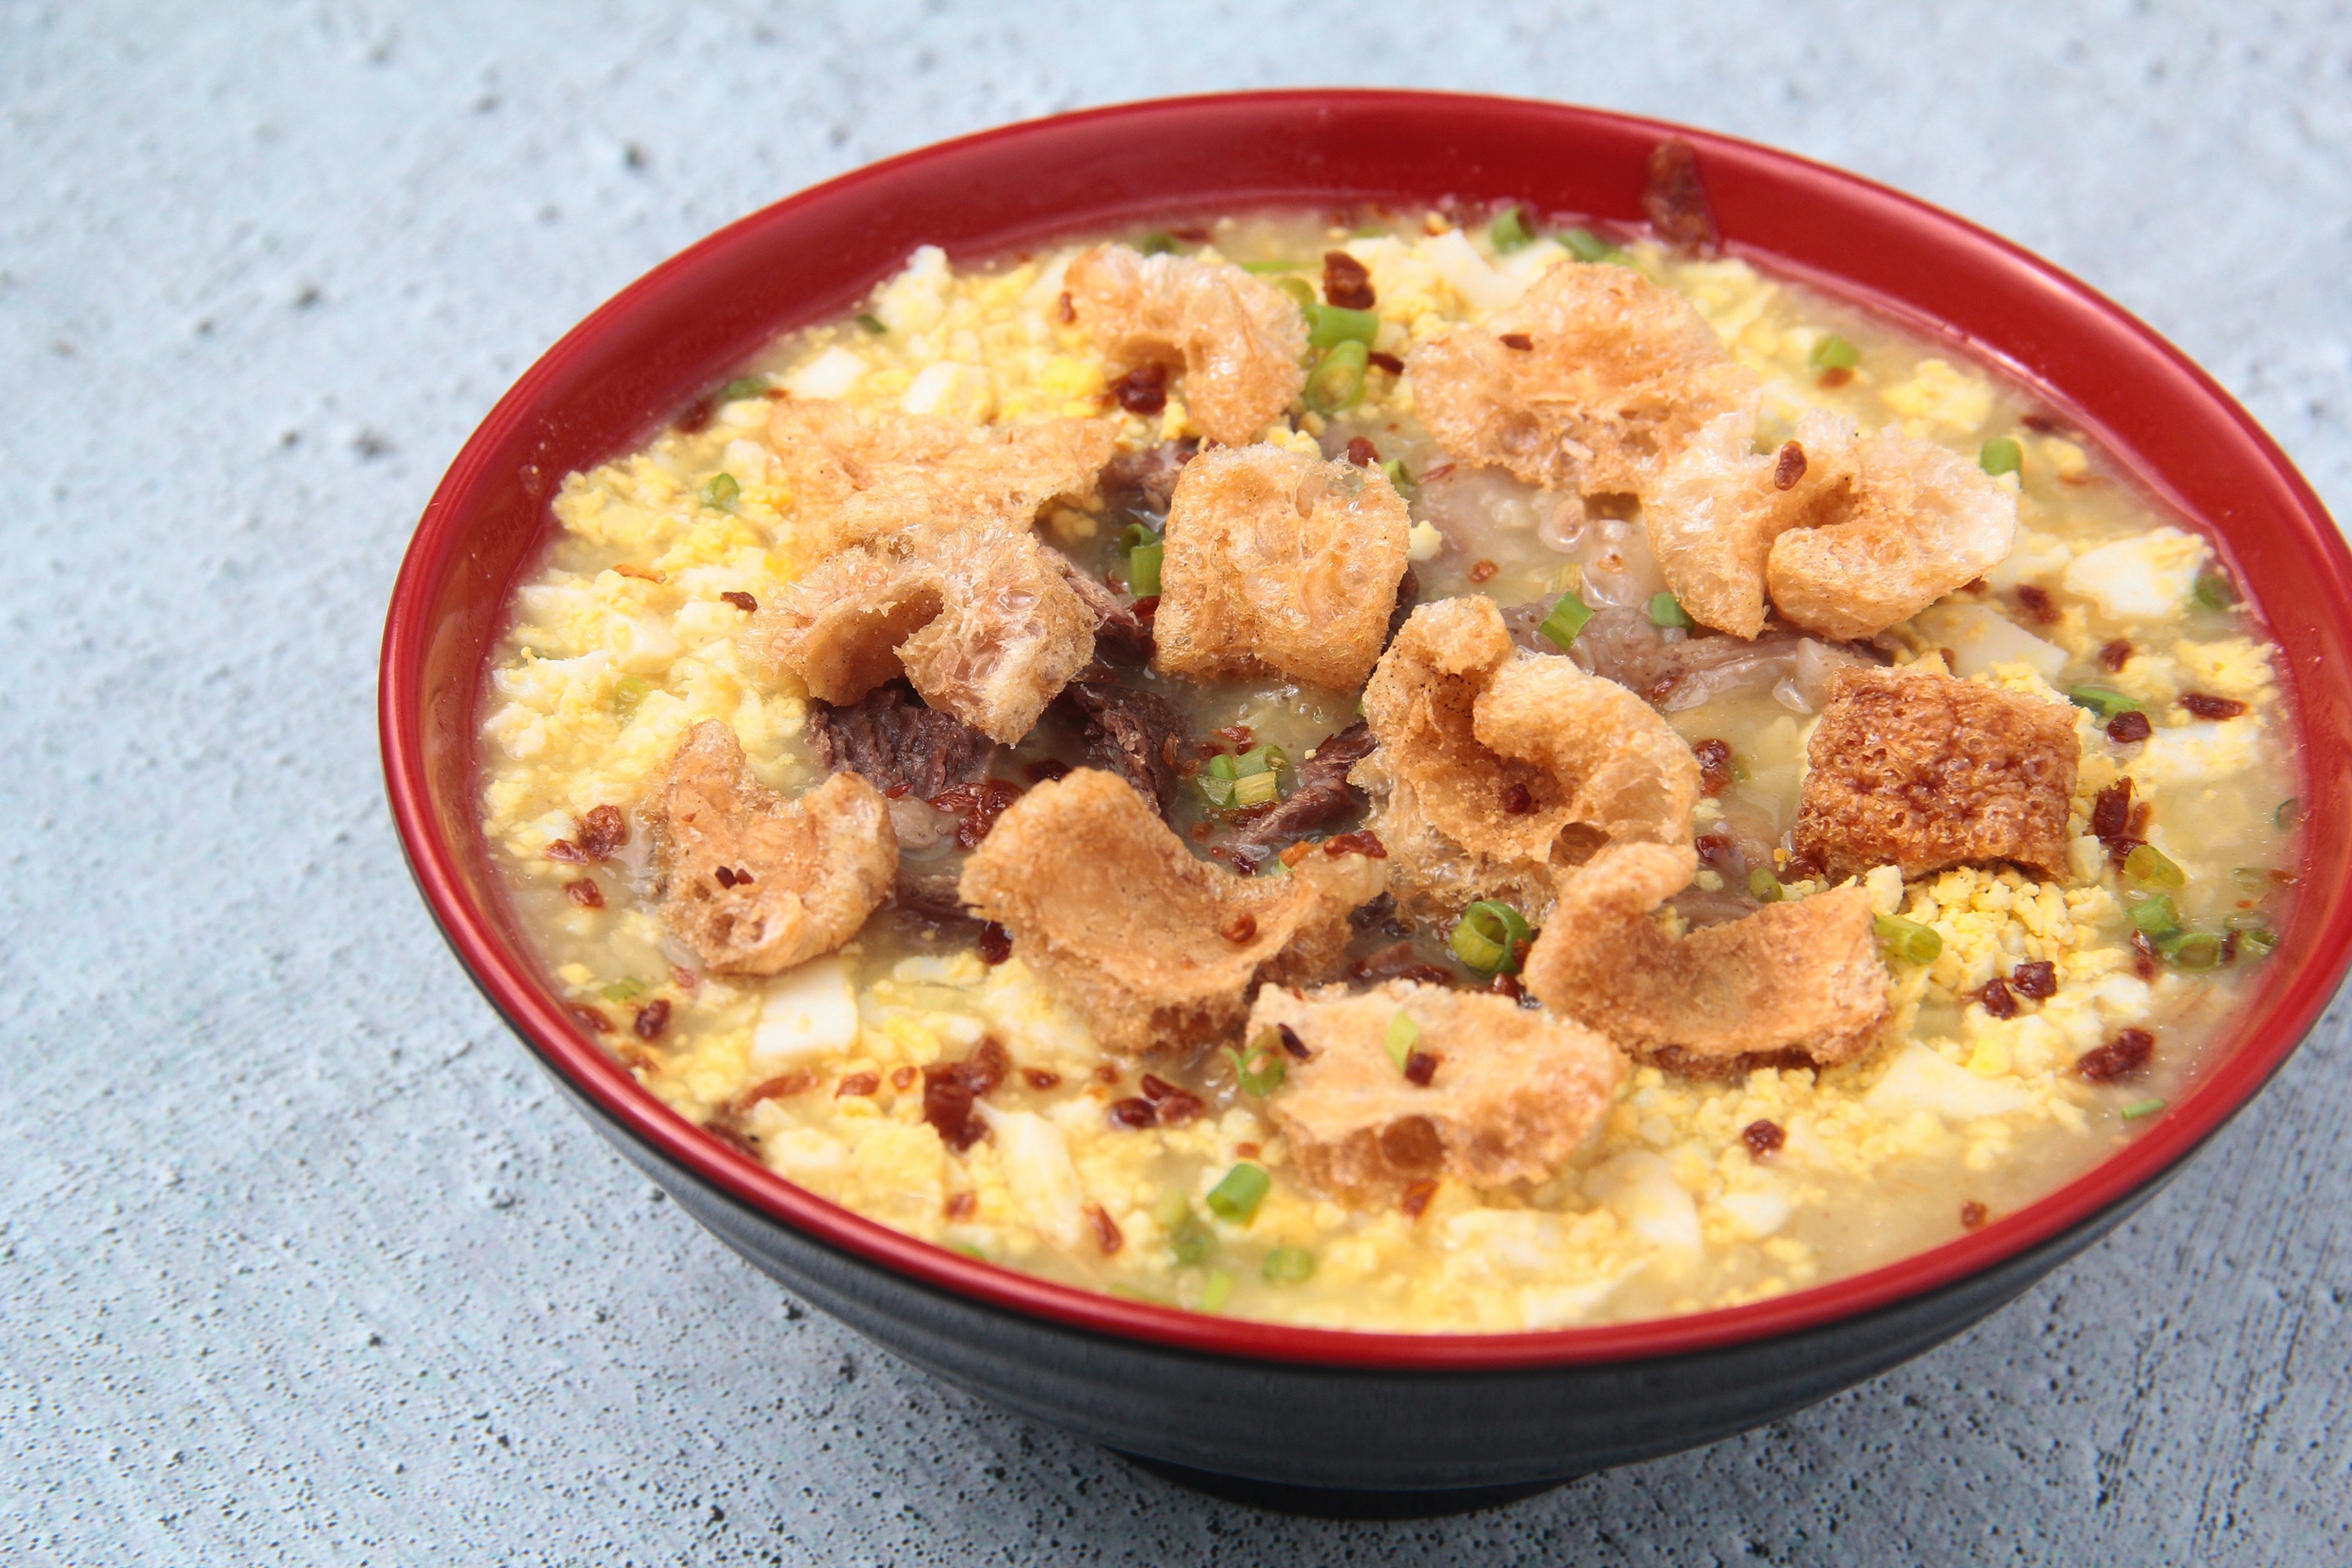 Chicharon pieces topped over a large bowl of tasty lugaw